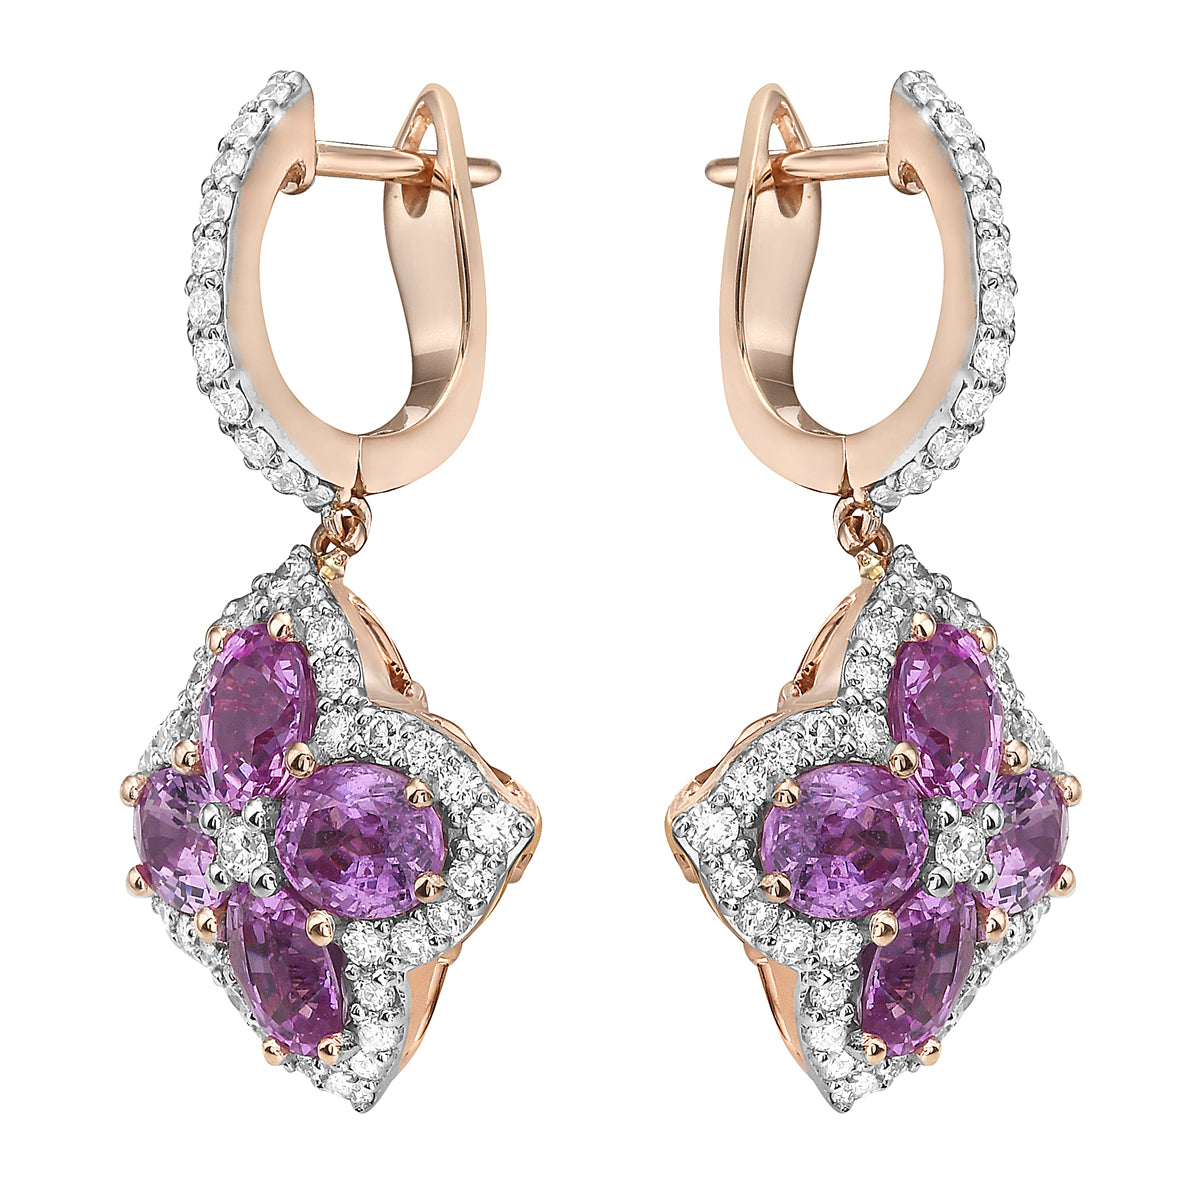 14K White Gold Diamond Clover and Pink Sapphire Earrings